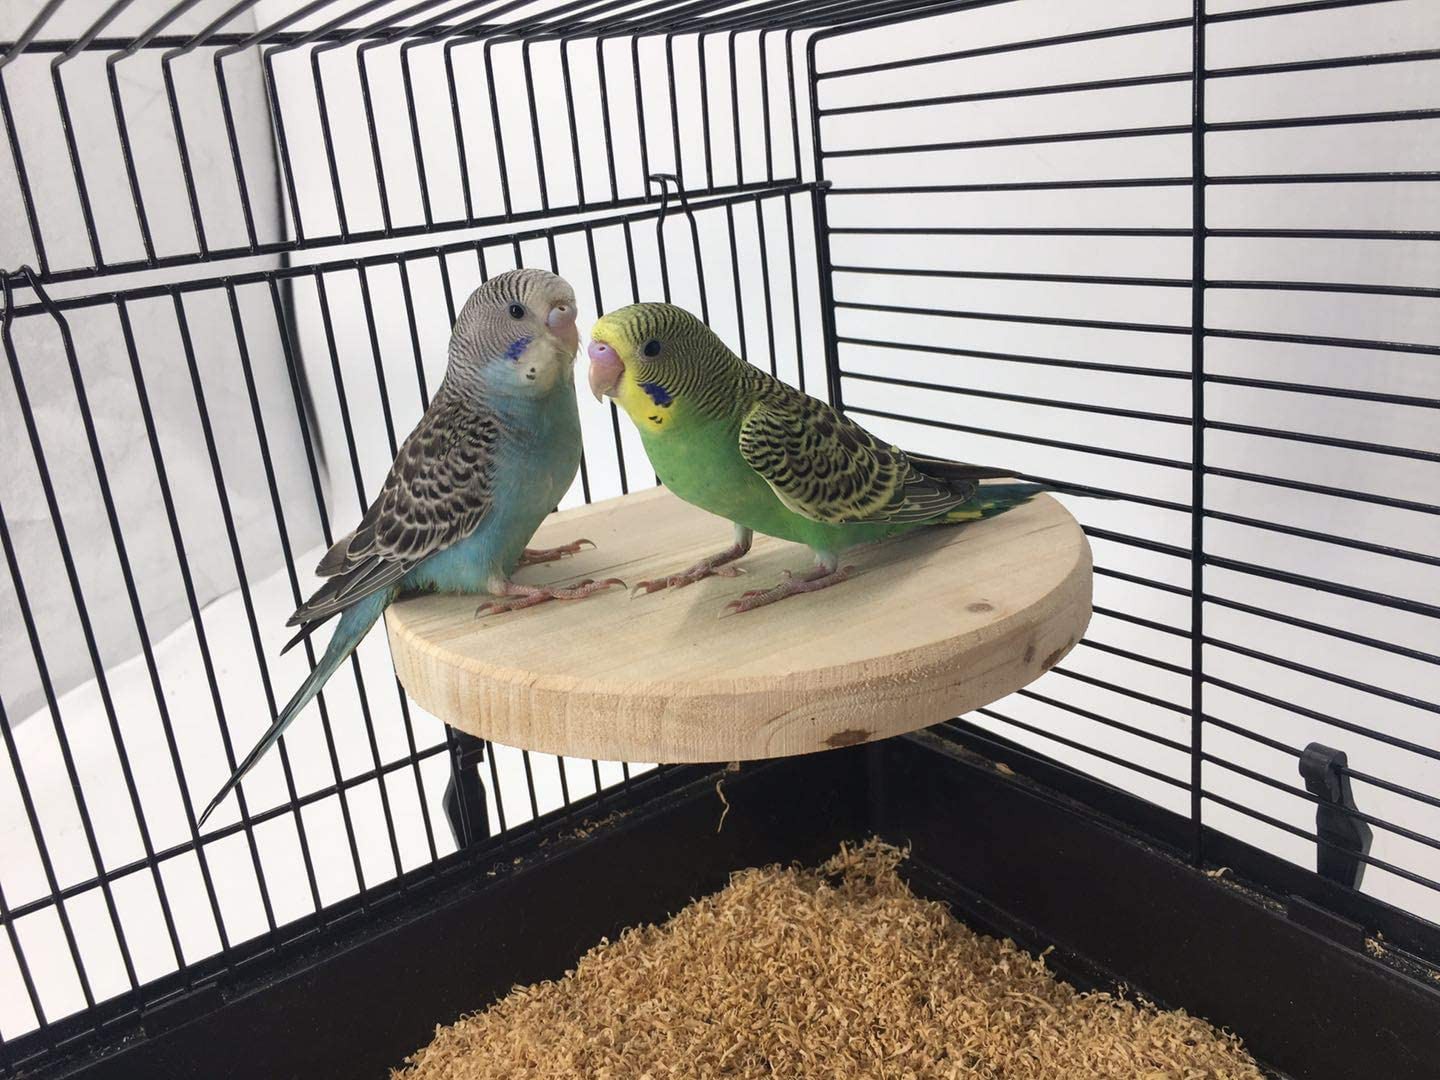 MINORPET Wood Perch Platform Stand for Small Animals Pet Cage Accessories Bird Parrot African Grey Parakeet Conure Cockatiel Budgie Gerbil Rat Mouse Chinchilla Hamster Exercise Toy